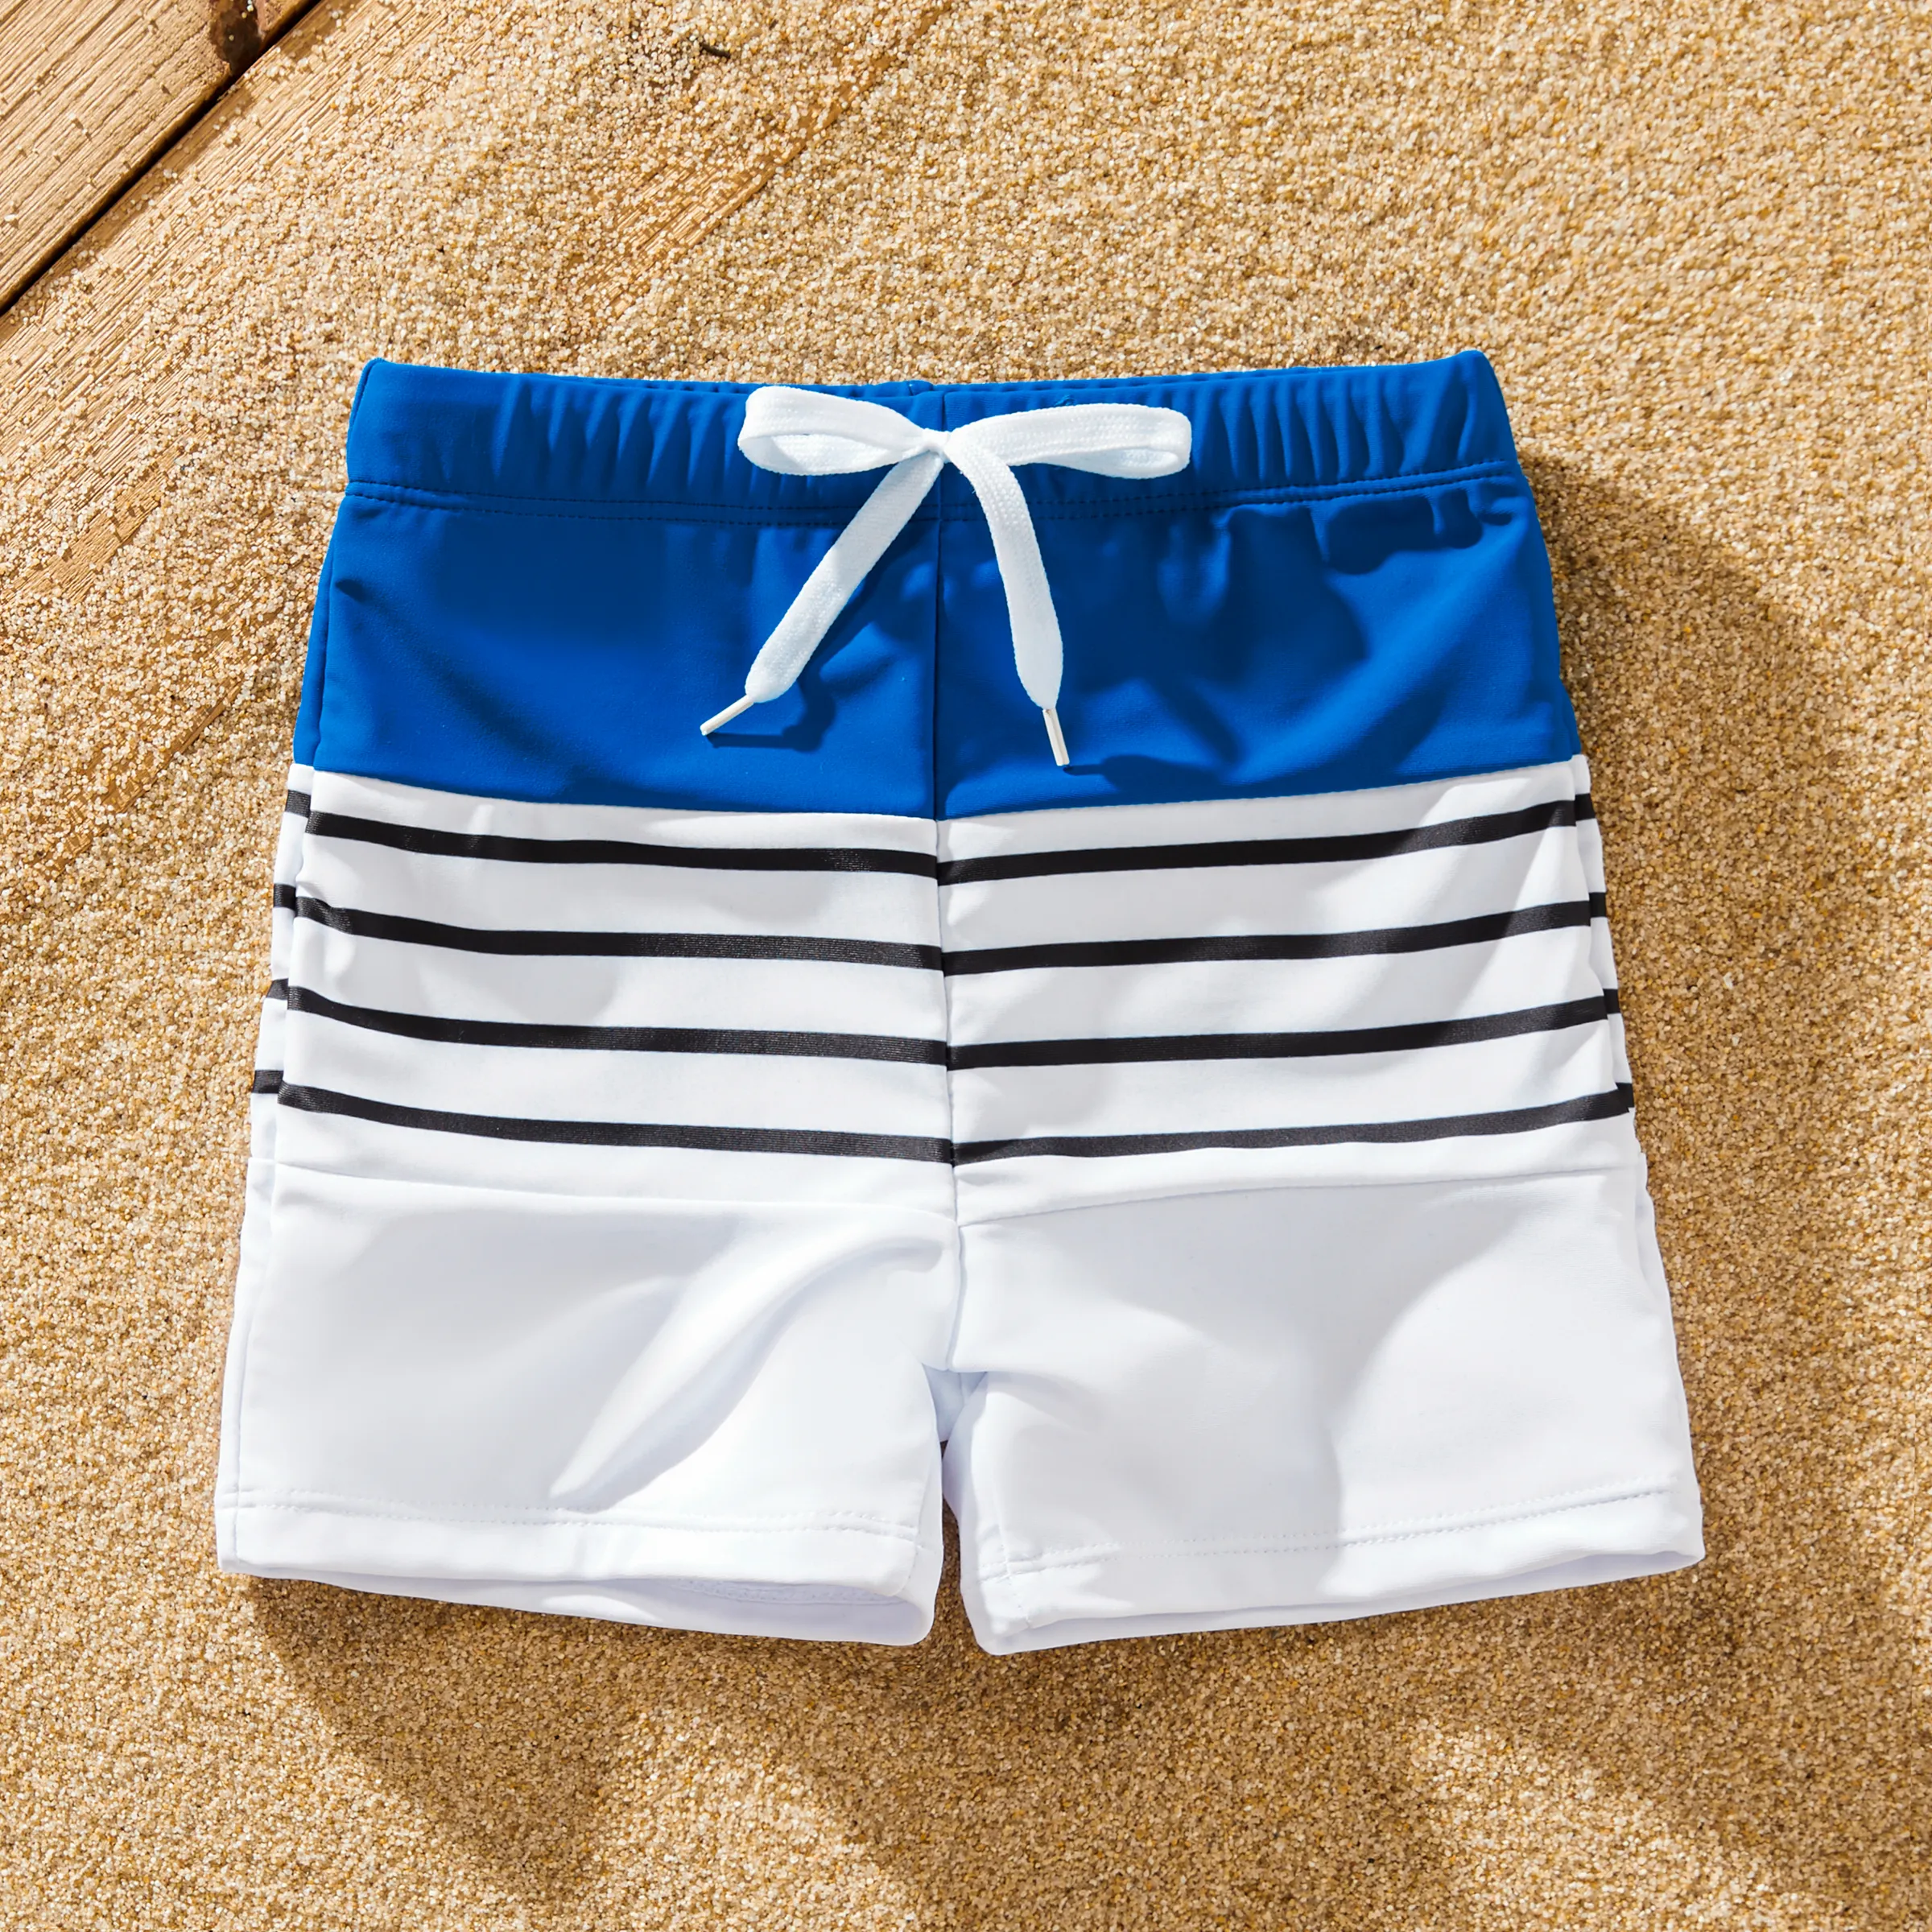 Matching Family Swimsuit Colorblock Drawstring Swim Trunks or Striped Blue Spliced Tankini with Cros